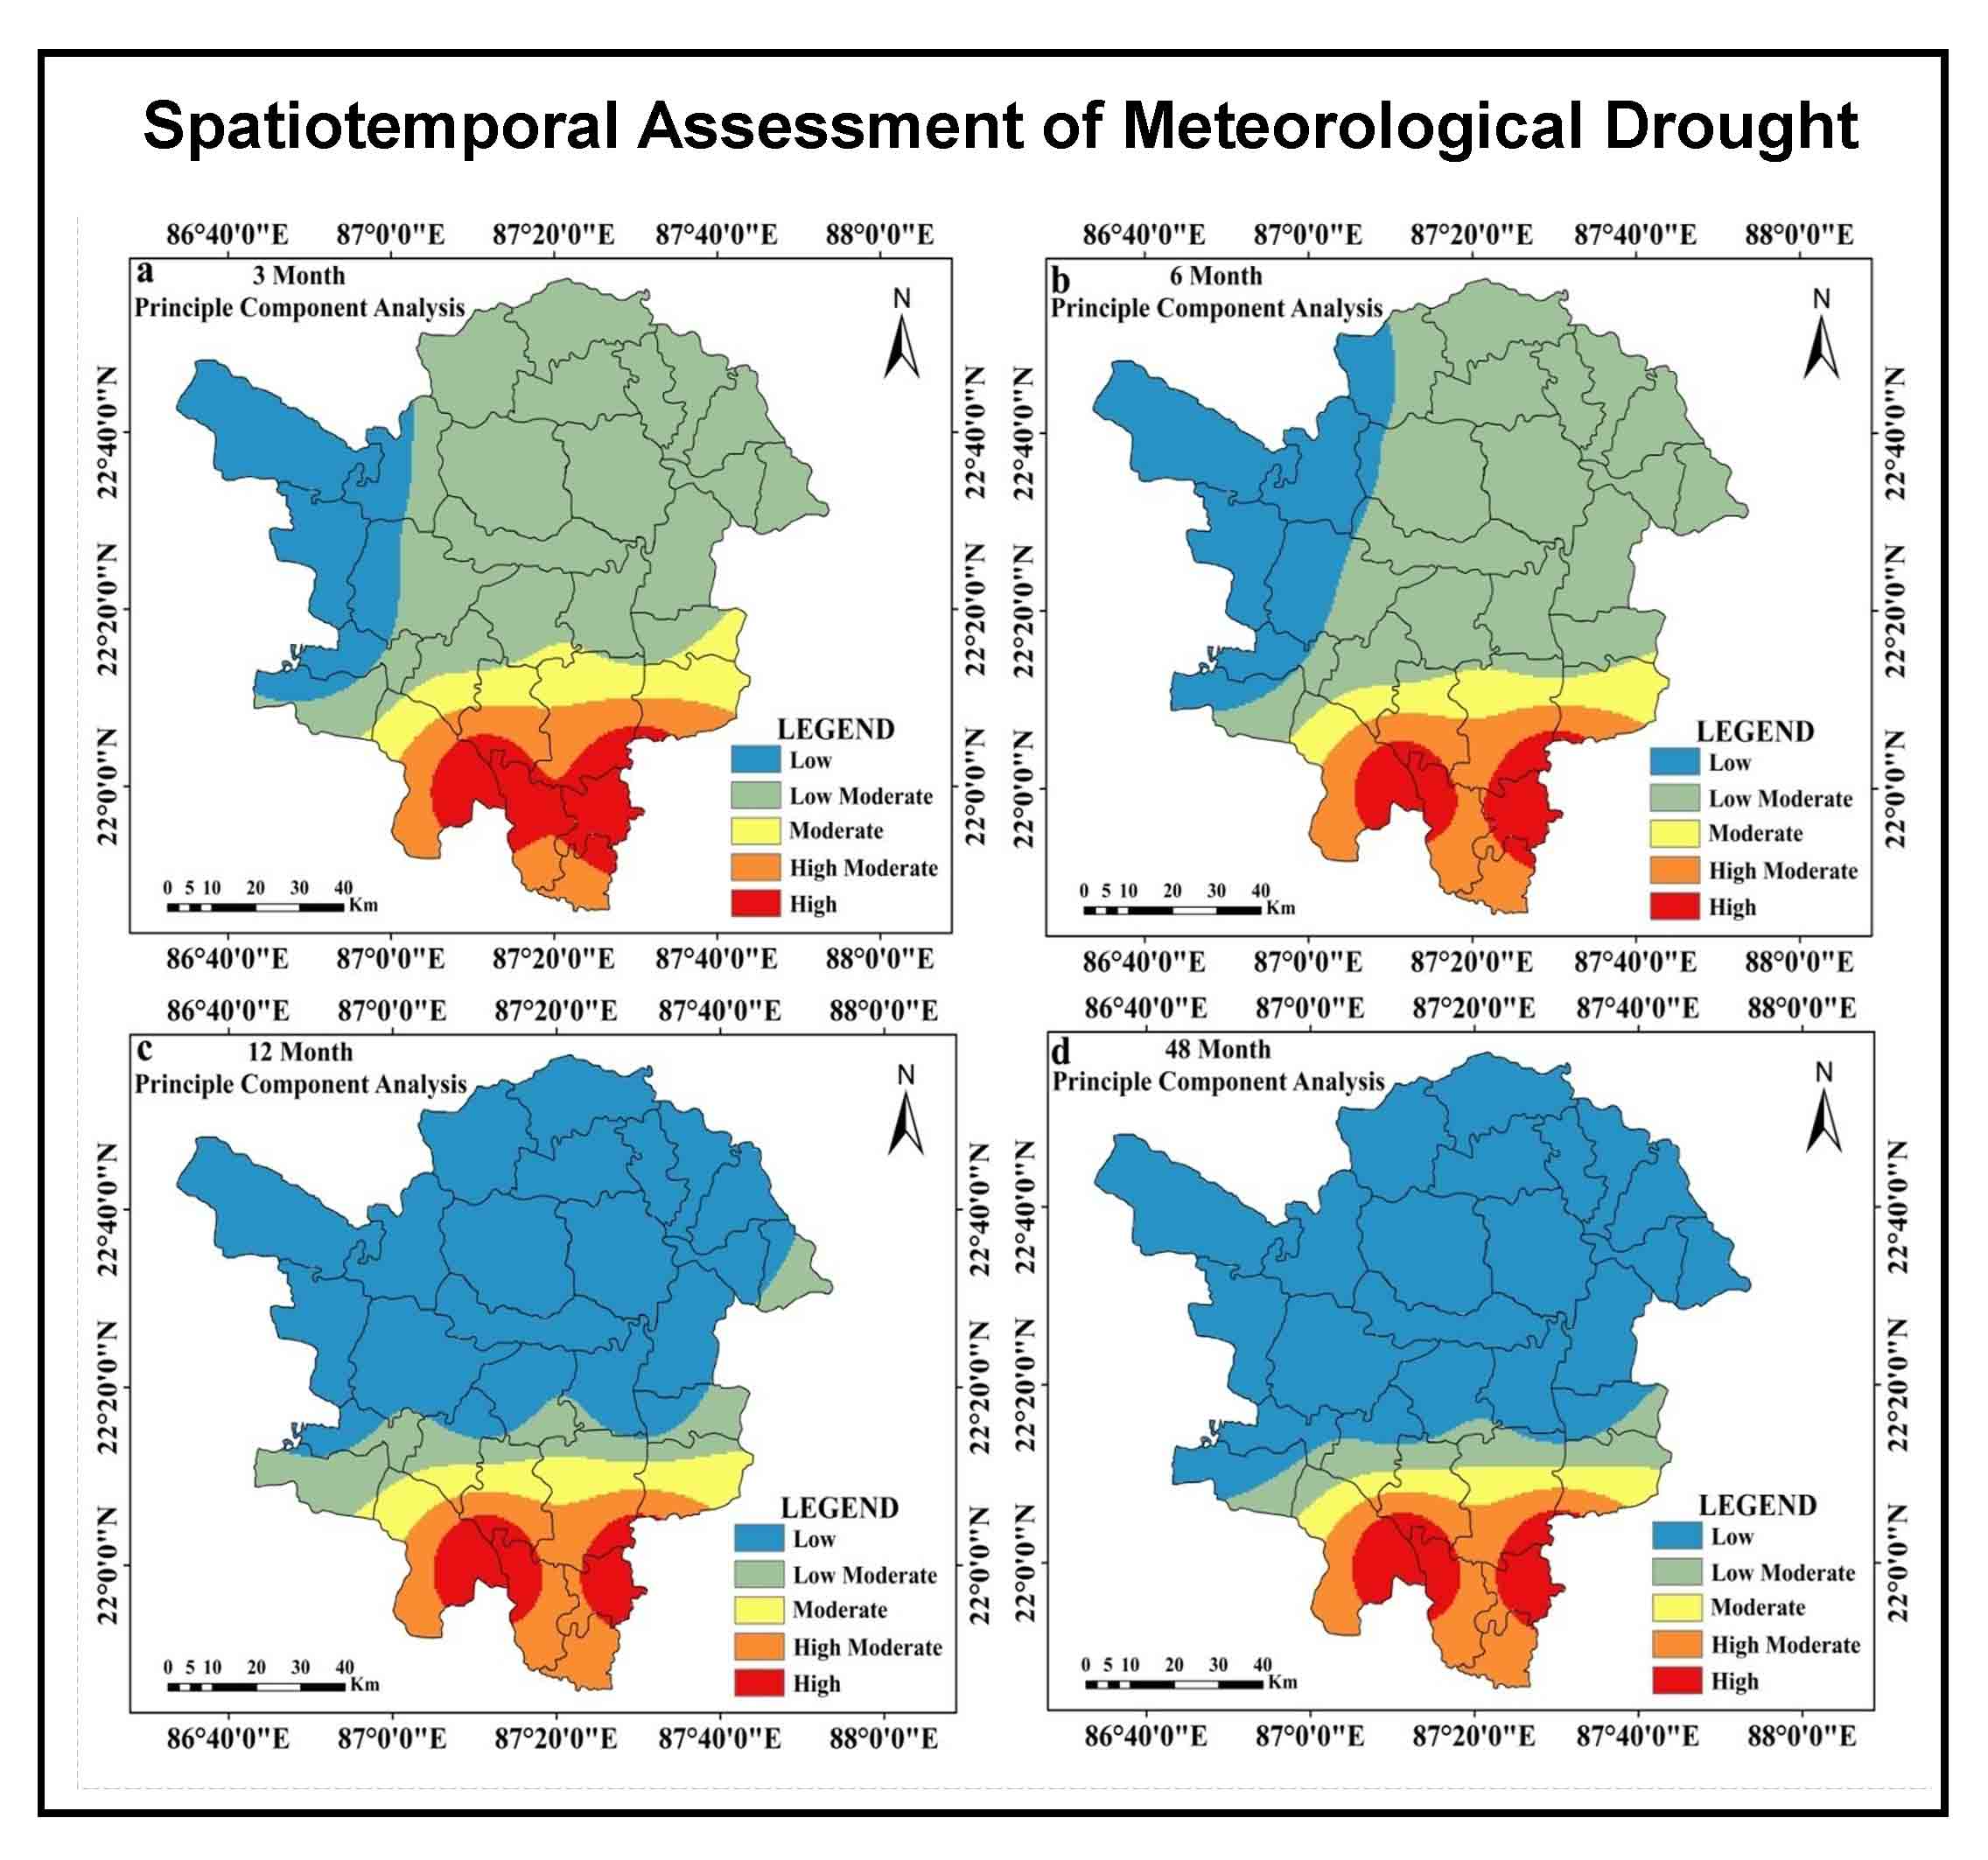 Spatiotemporal Assessment of Meteorological Drought of Paschim Medinipur District, West Bengal, India